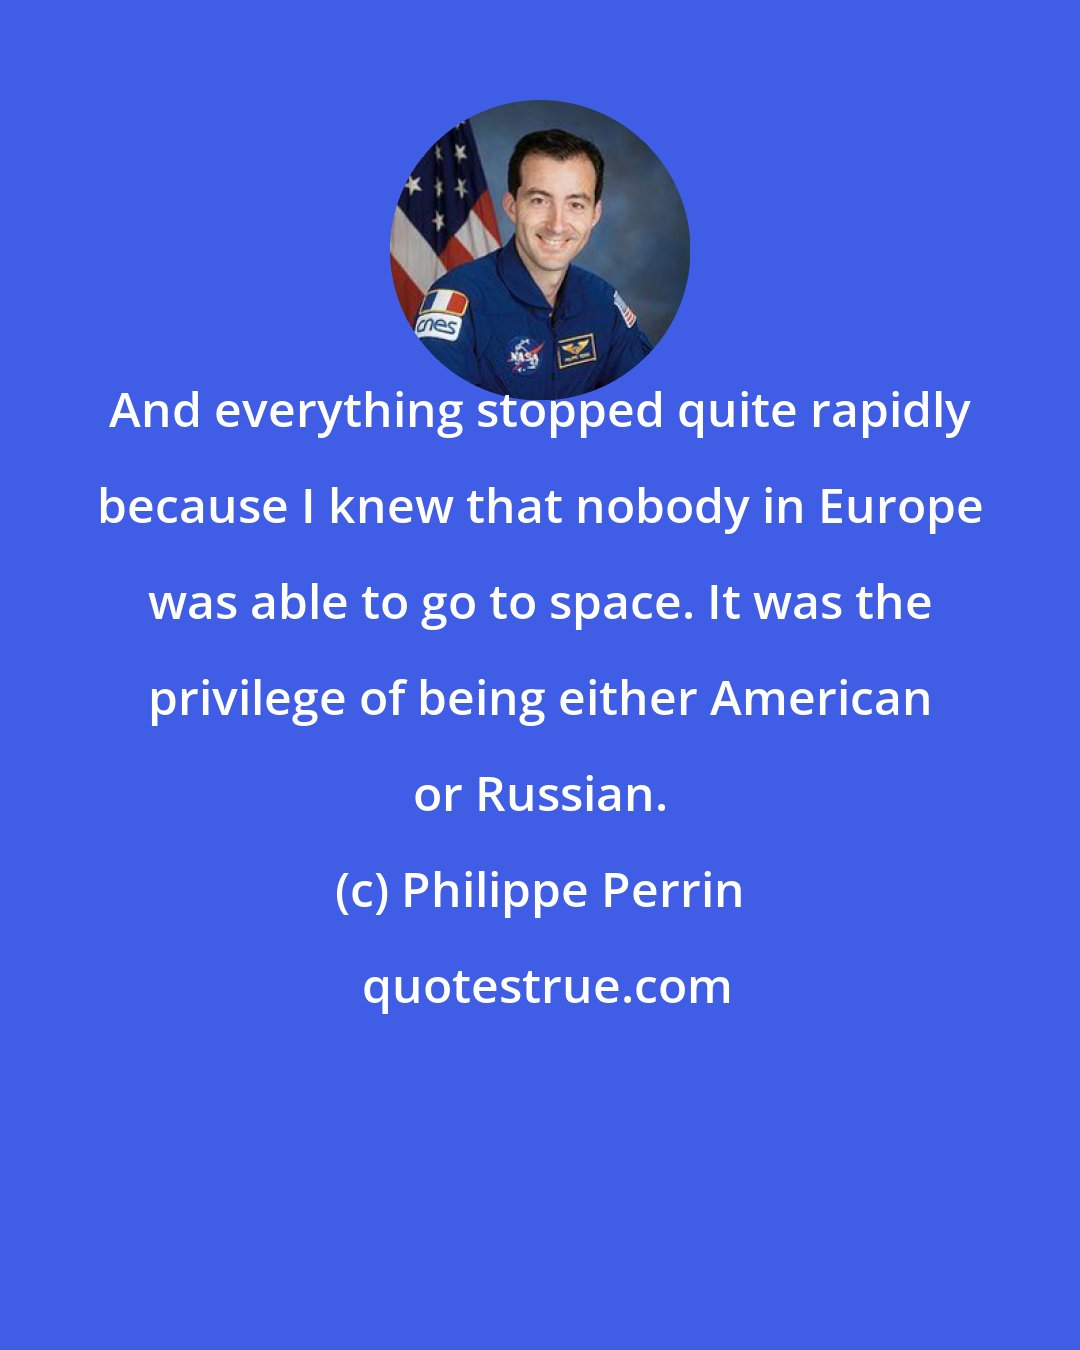 Philippe Perrin: And everything stopped quite rapidly because I knew that nobody in Europe was able to go to space. It was the privilege of being either American or Russian.